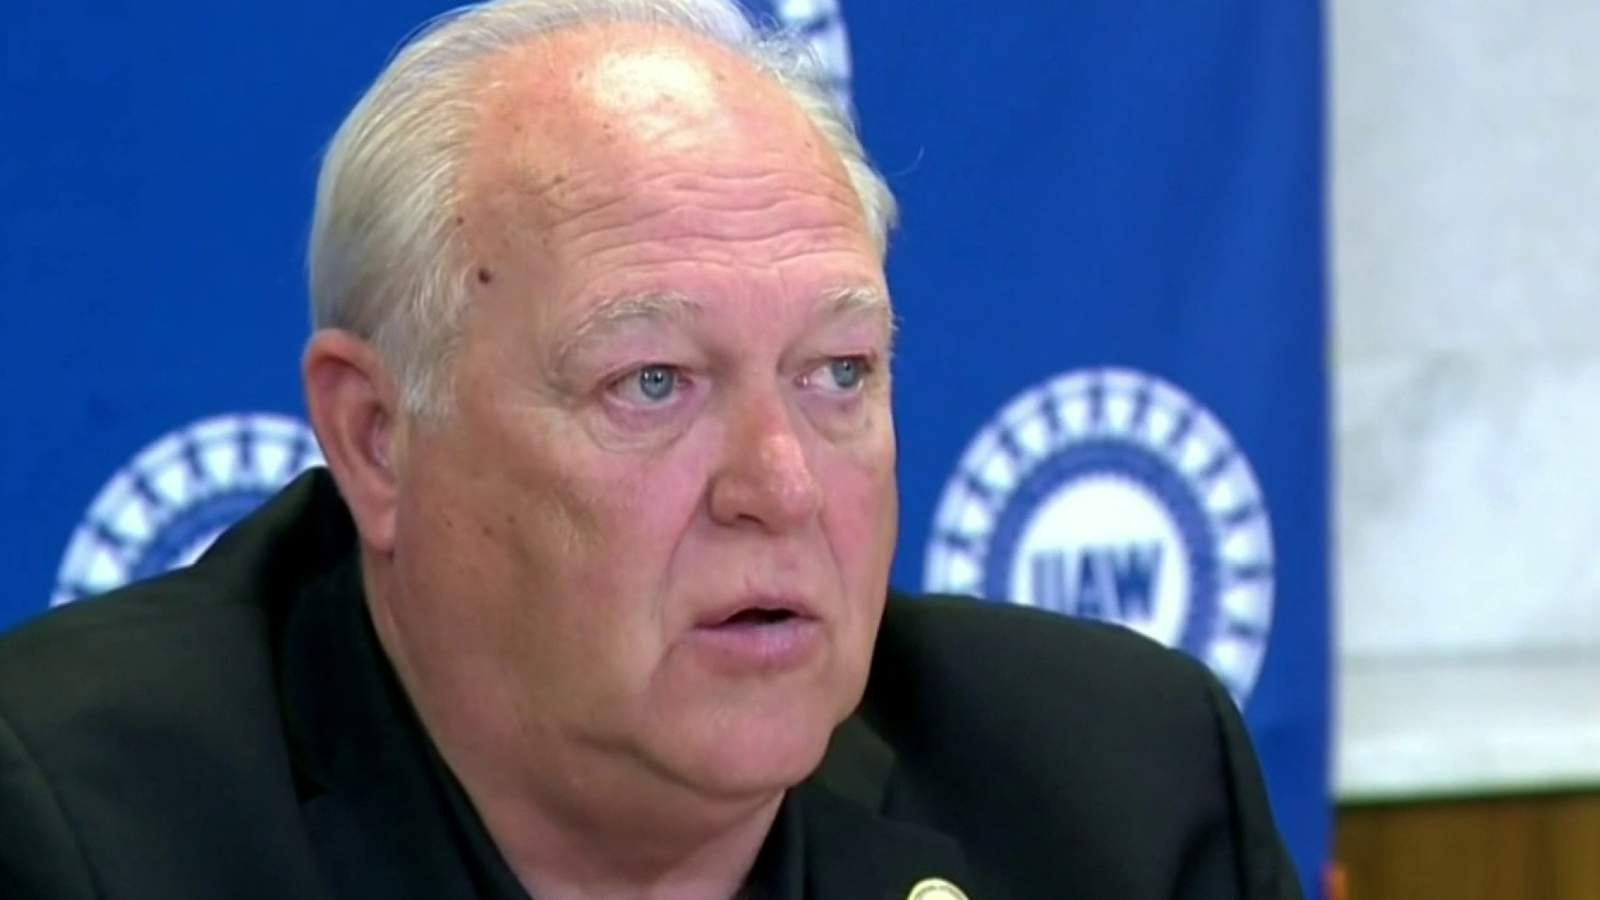 Former UAW president Dennis Williams is 15th person charged in corruption case